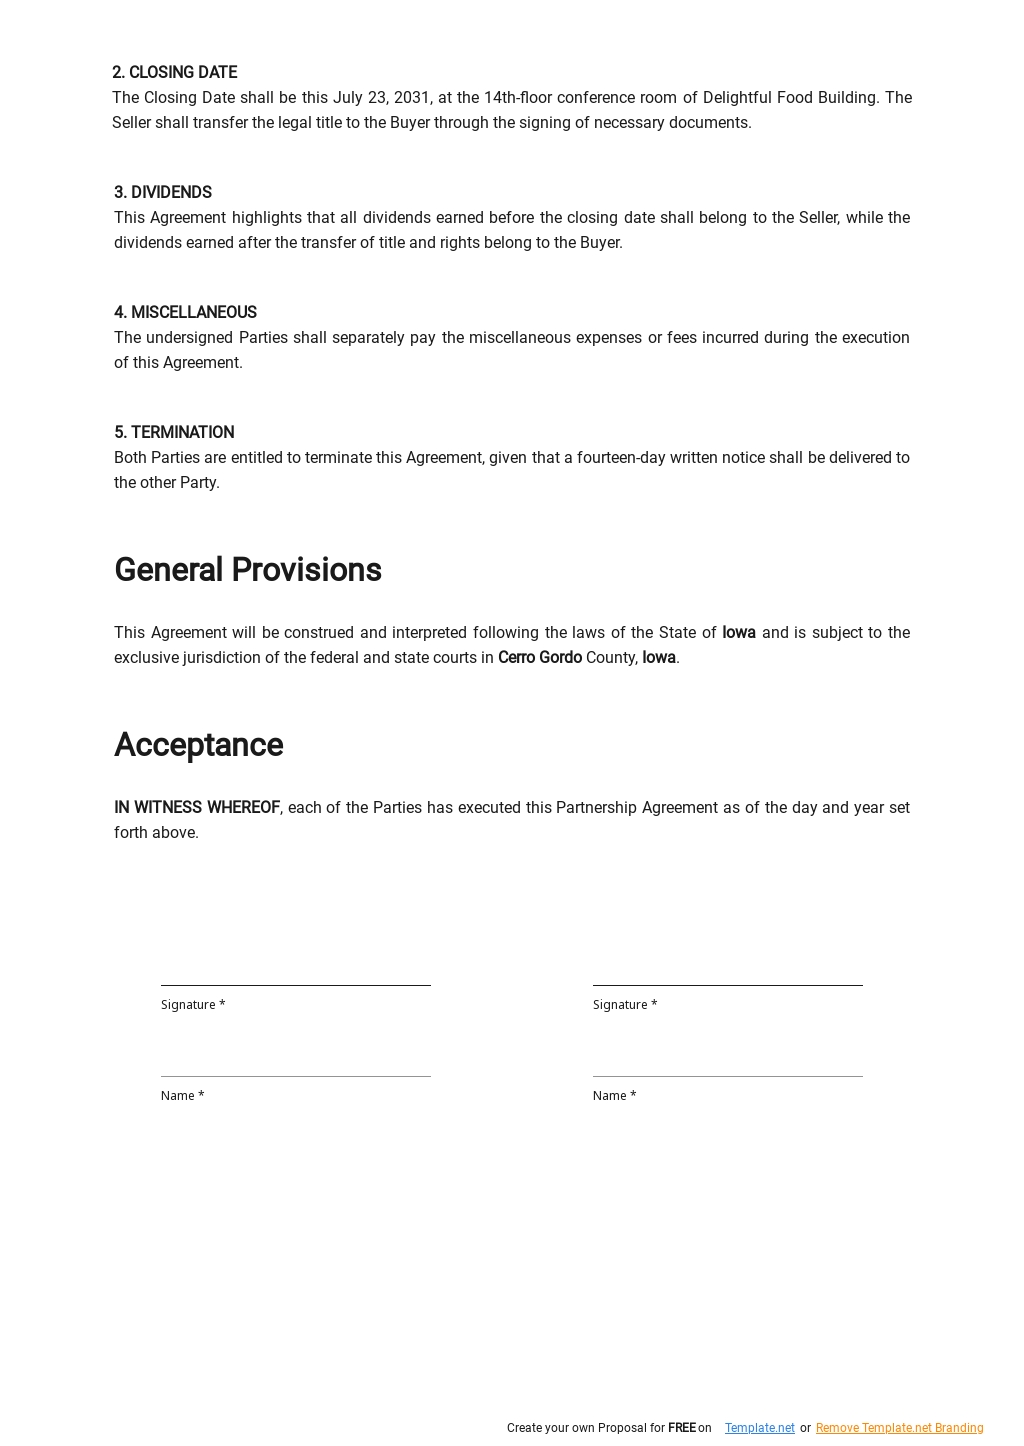 Corporate Buyout Agreement Template 2.jpe